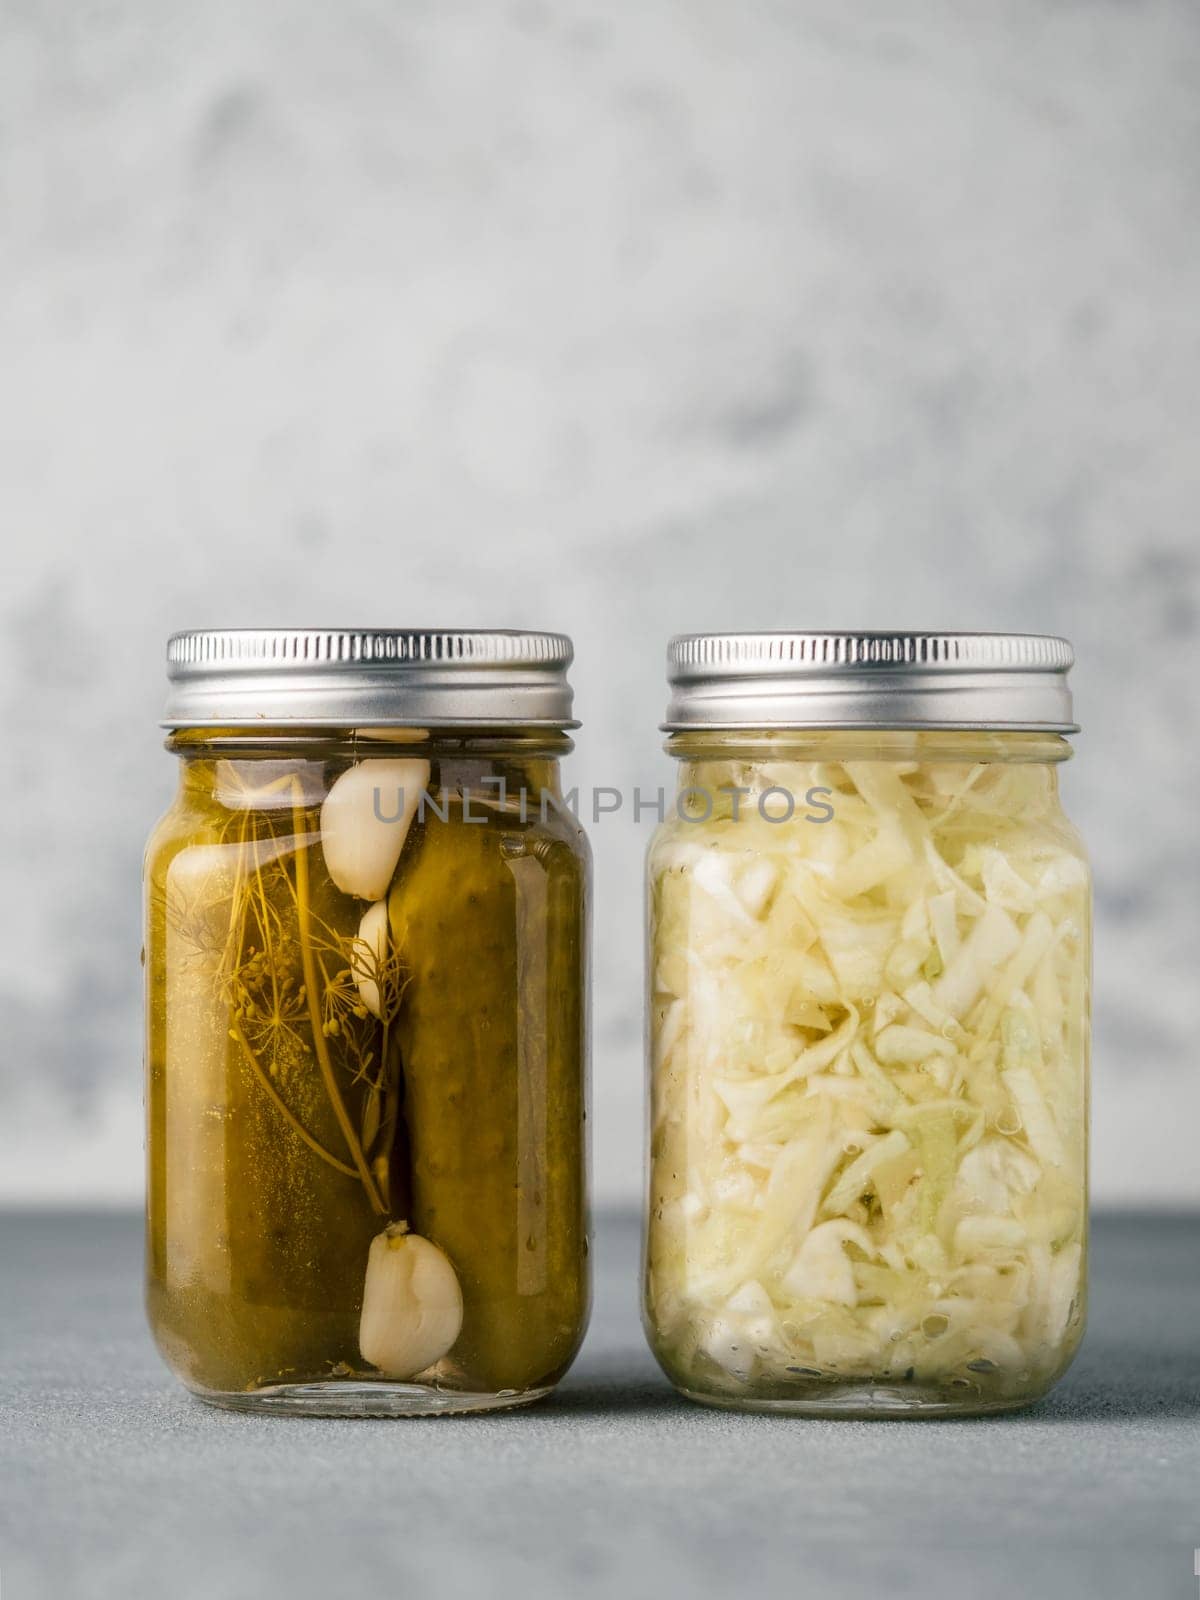 Pickled cucumbers and Sauerkraut on gray background with copy space for text. Perfect homemade marinated cucumbers and pickling cabbage in mason jar at home on table. Vertical